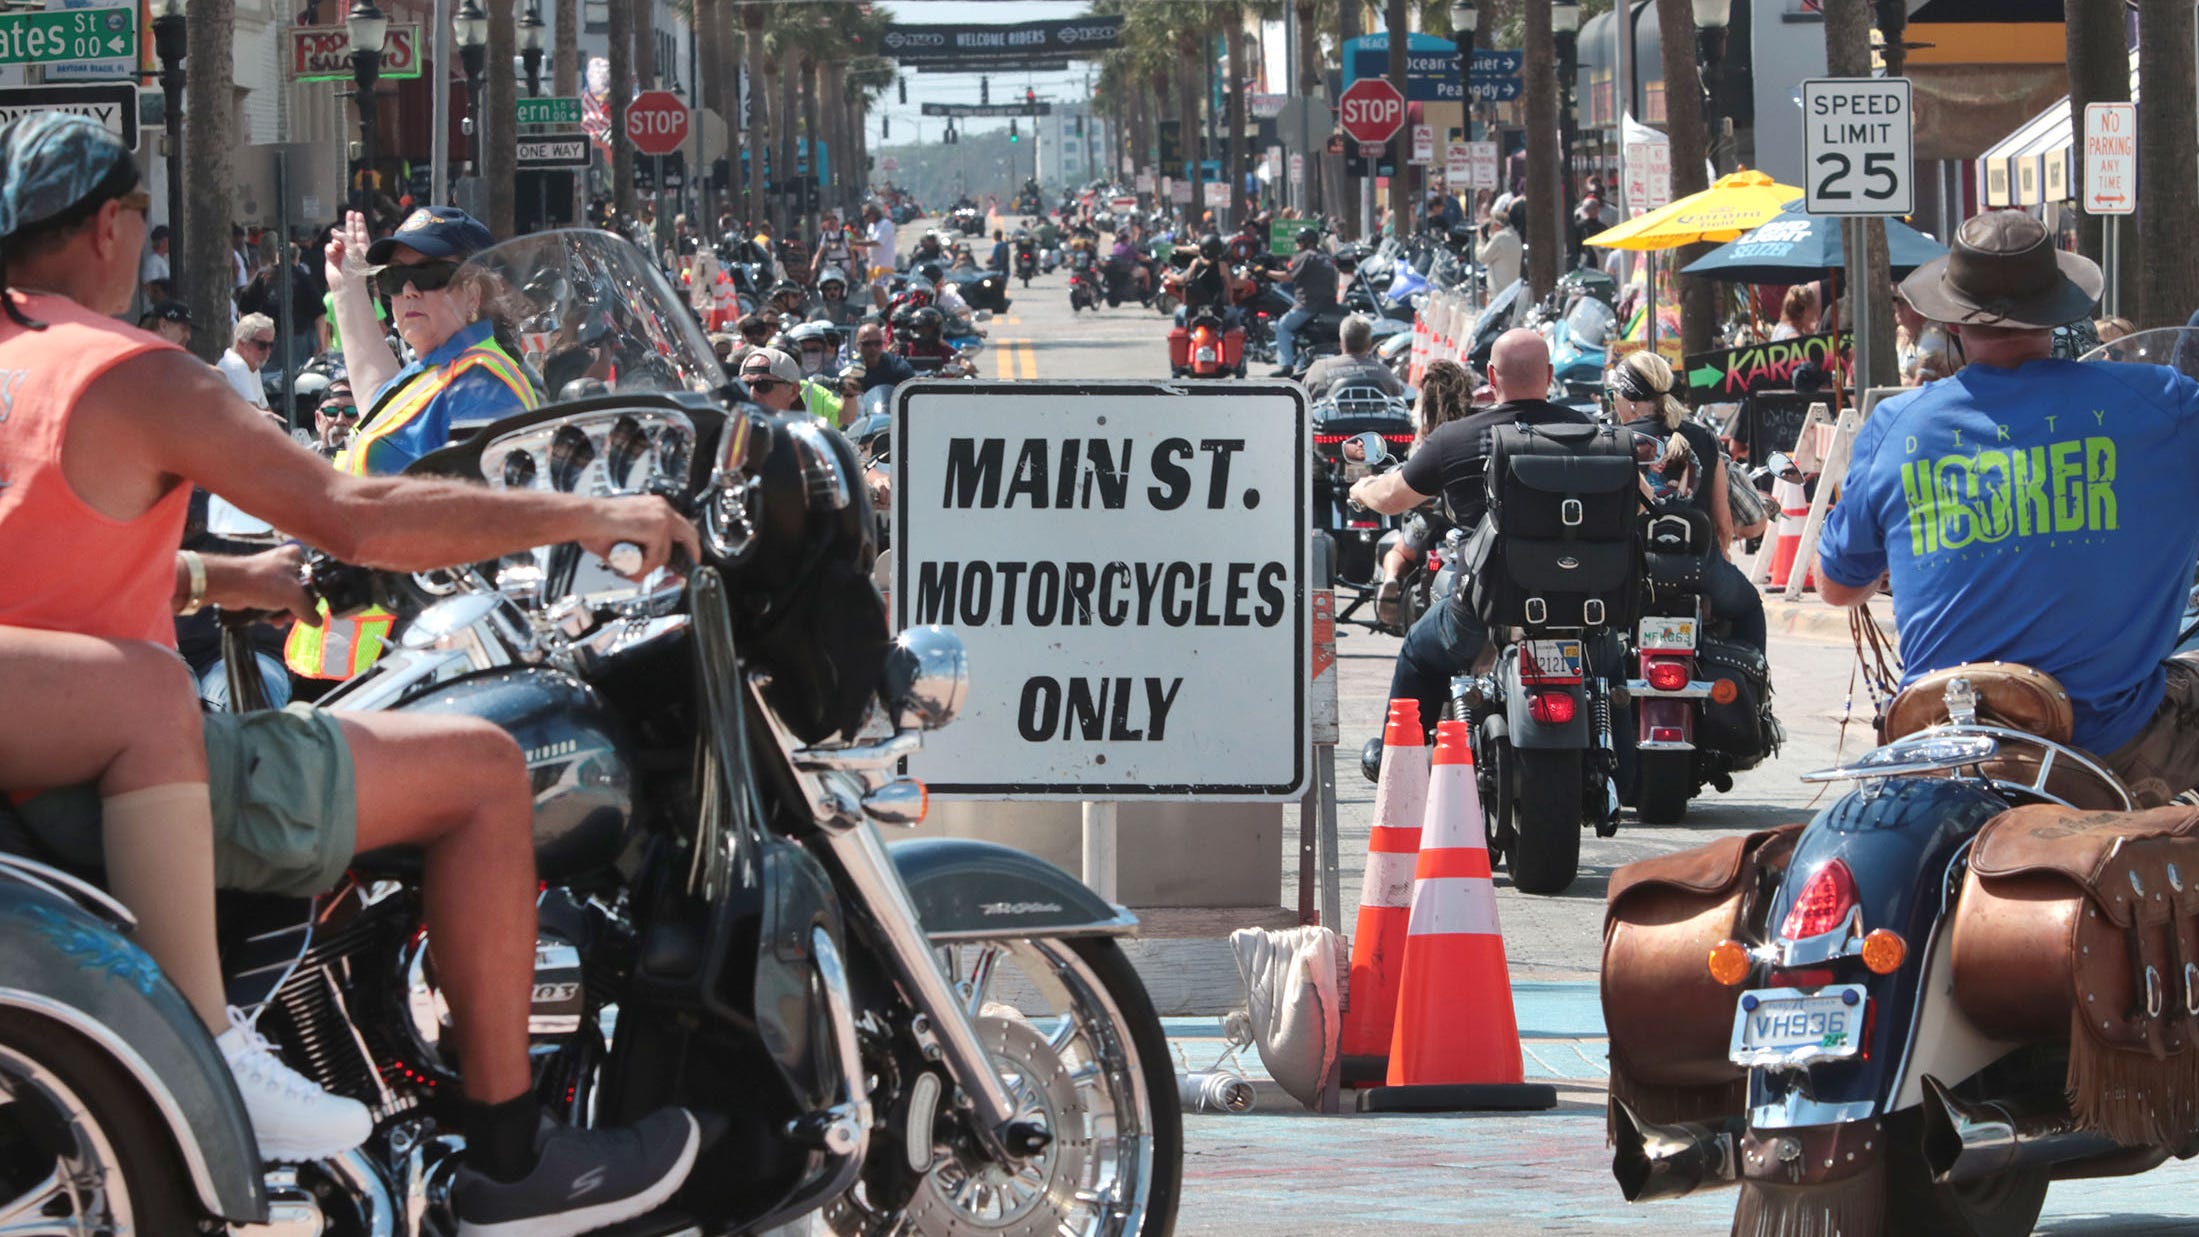 Motorcycles rumble along Main Street in Daytona Beach on opening day of